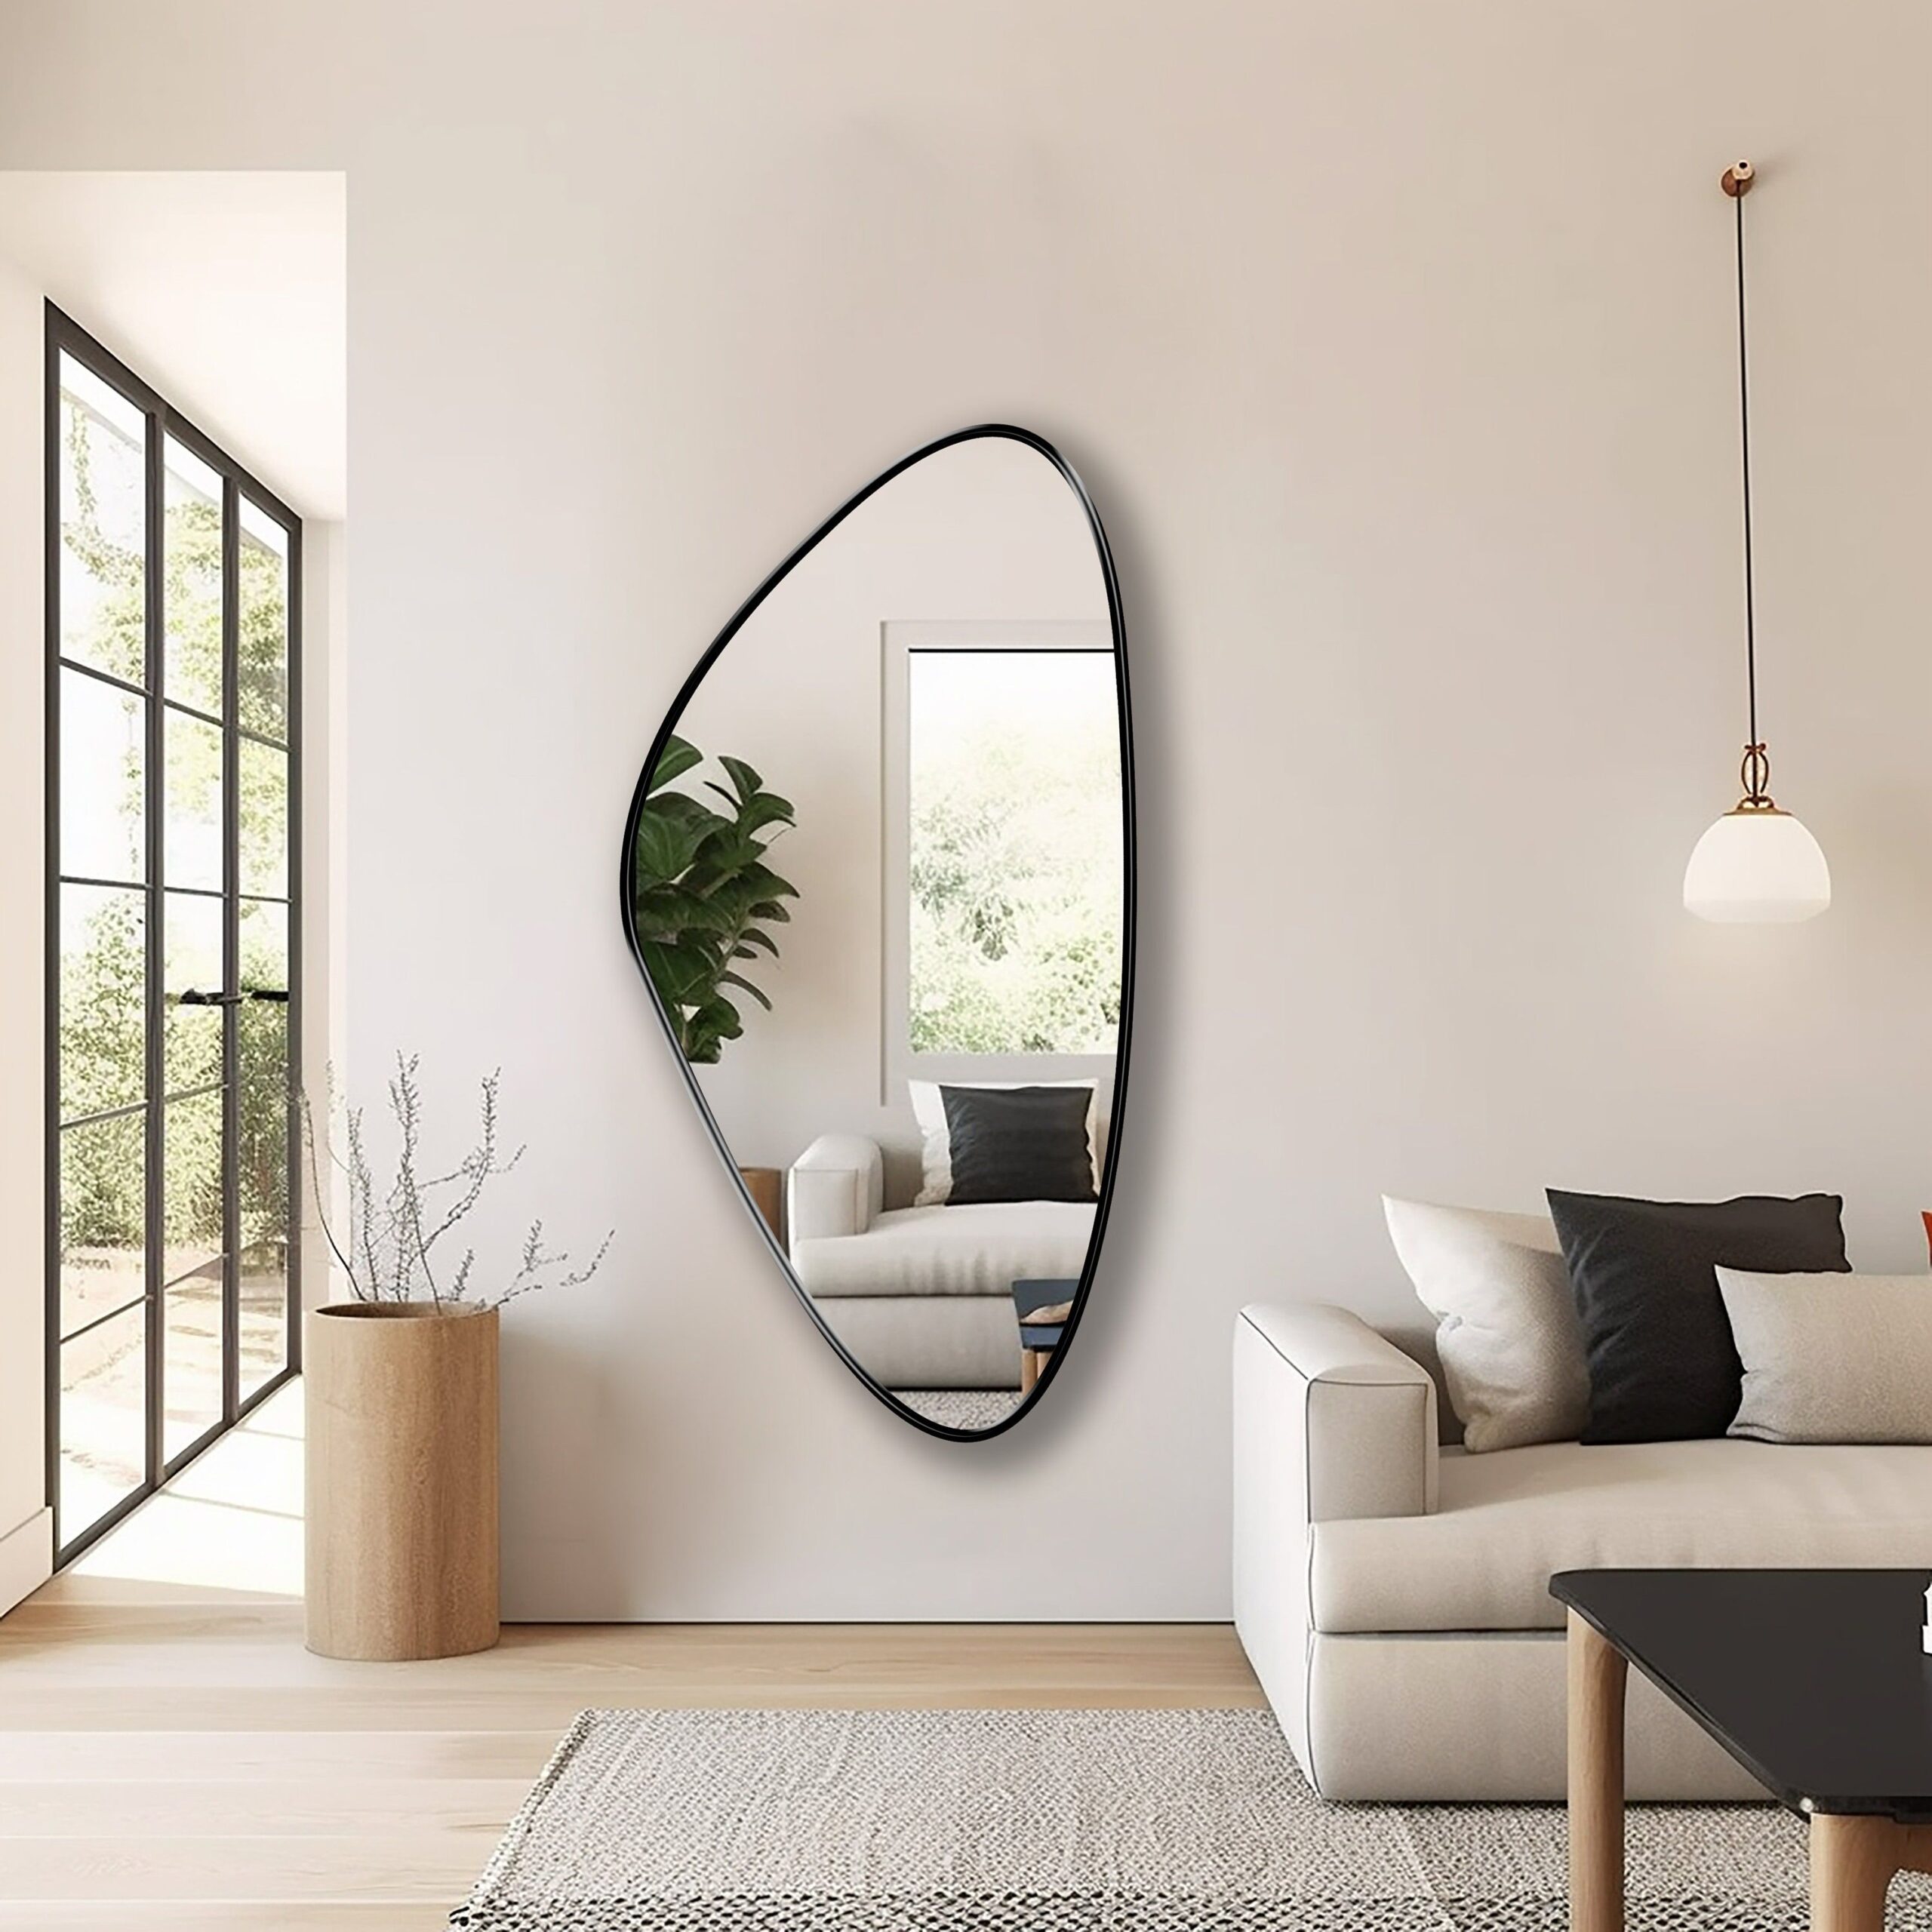 Hallway Mirror Upgrade Your Entryway with a Stunning Mirror